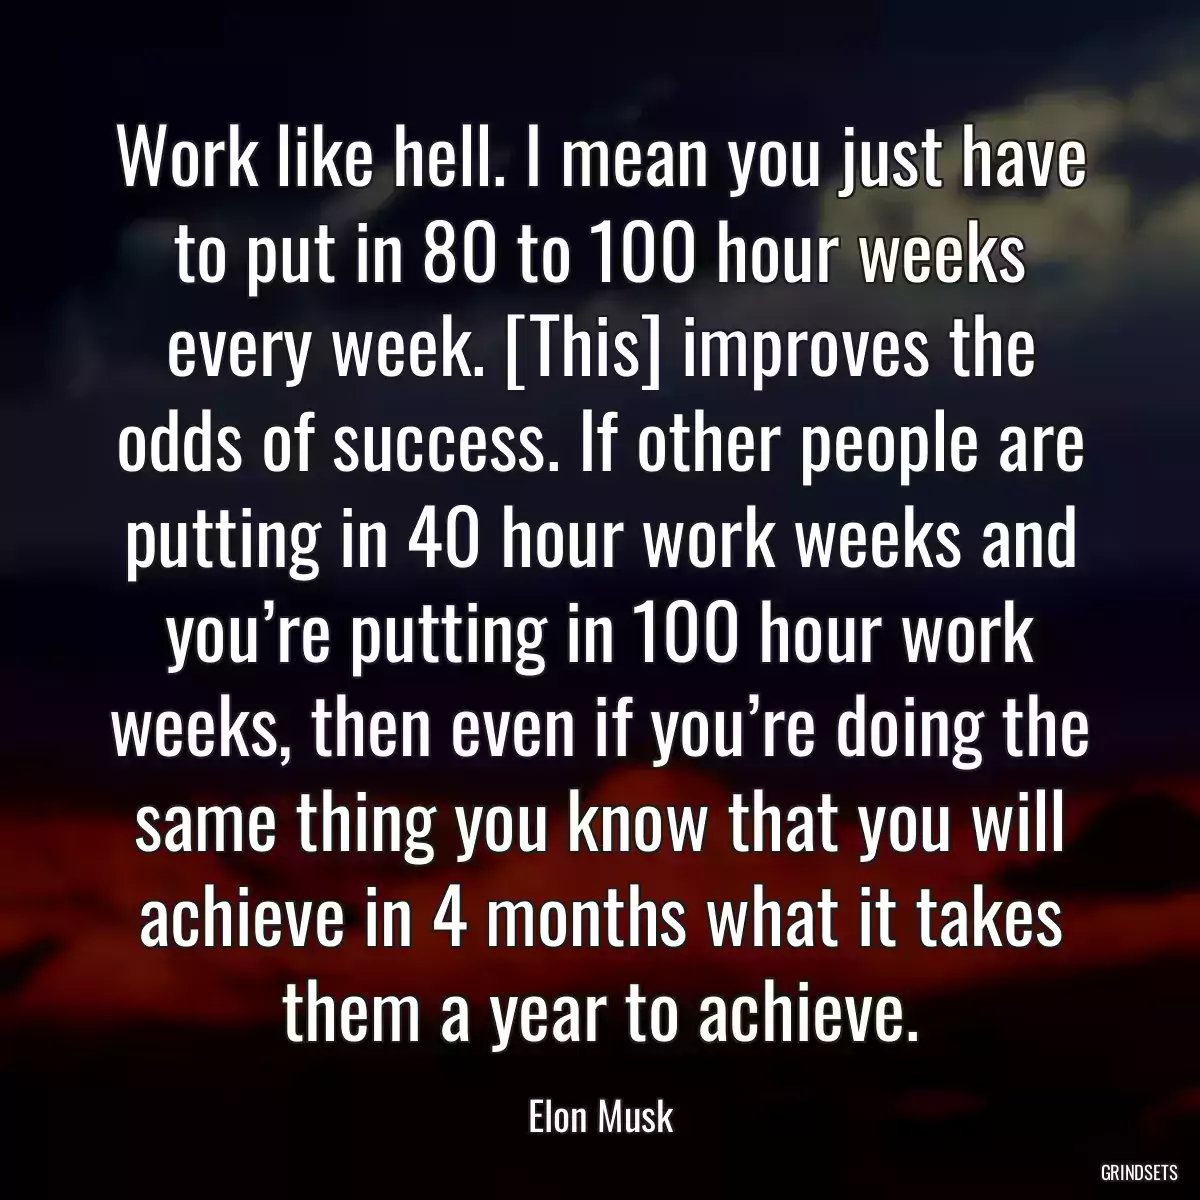 Work like hell. I mean you just have to put in 80 to 100 hour weeks every week. [This] improves the odds of success. If other people are putting in 40 hour work weeks and you’re putting in 100 hour work weeks, then even if you’re doing the same thing you know that you will achieve in 4 months what it takes them a year to achieve.